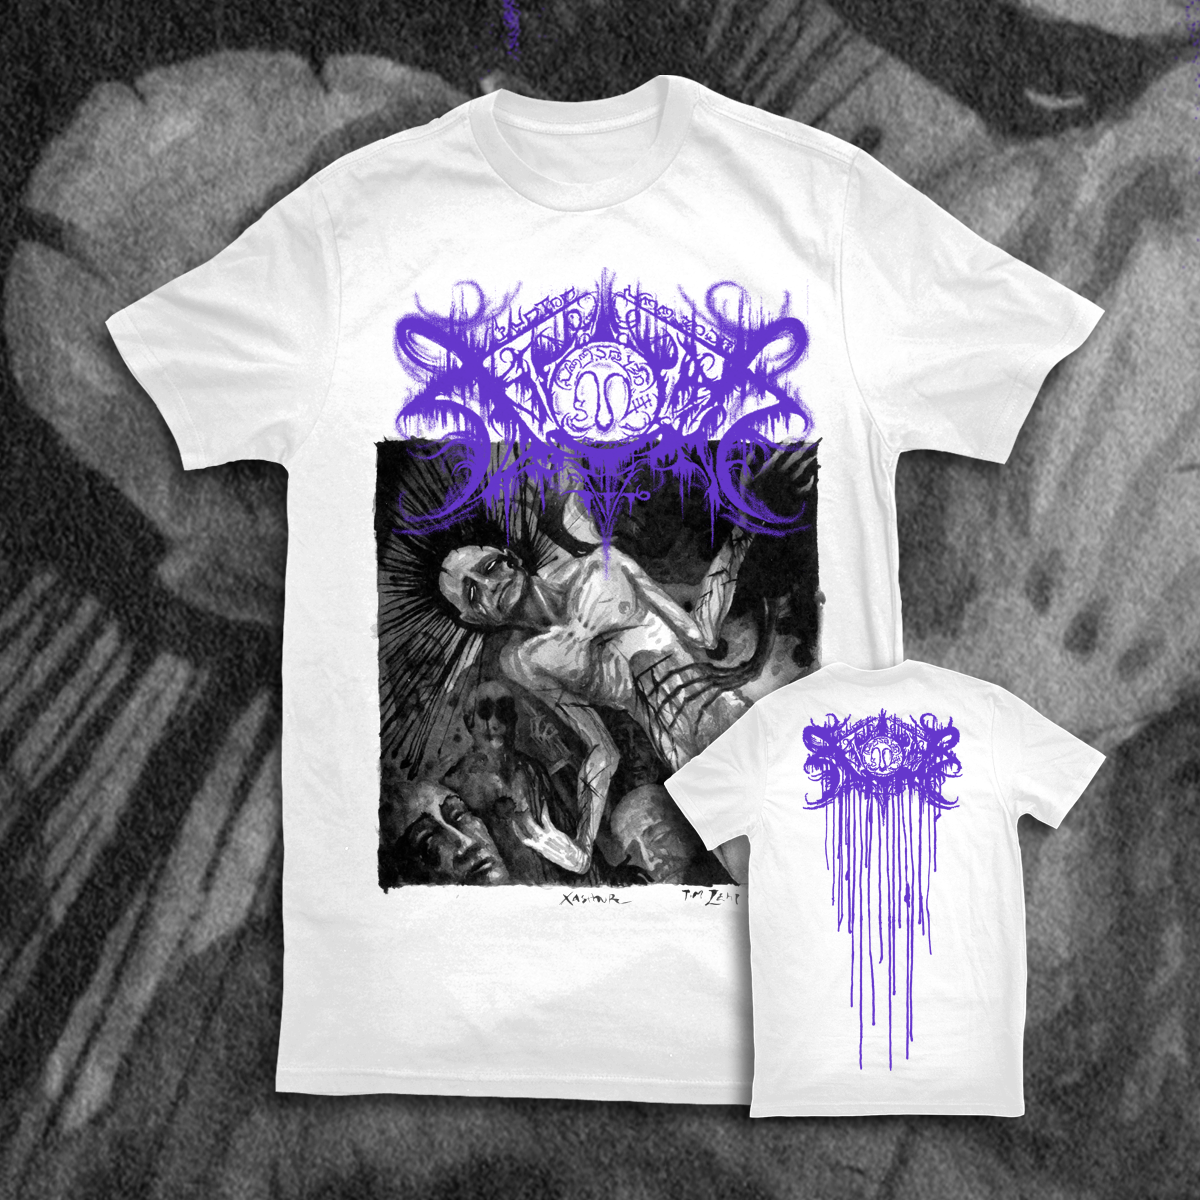 XASTHUR "ALL REFLECTIONS DRAINED" SHIRT